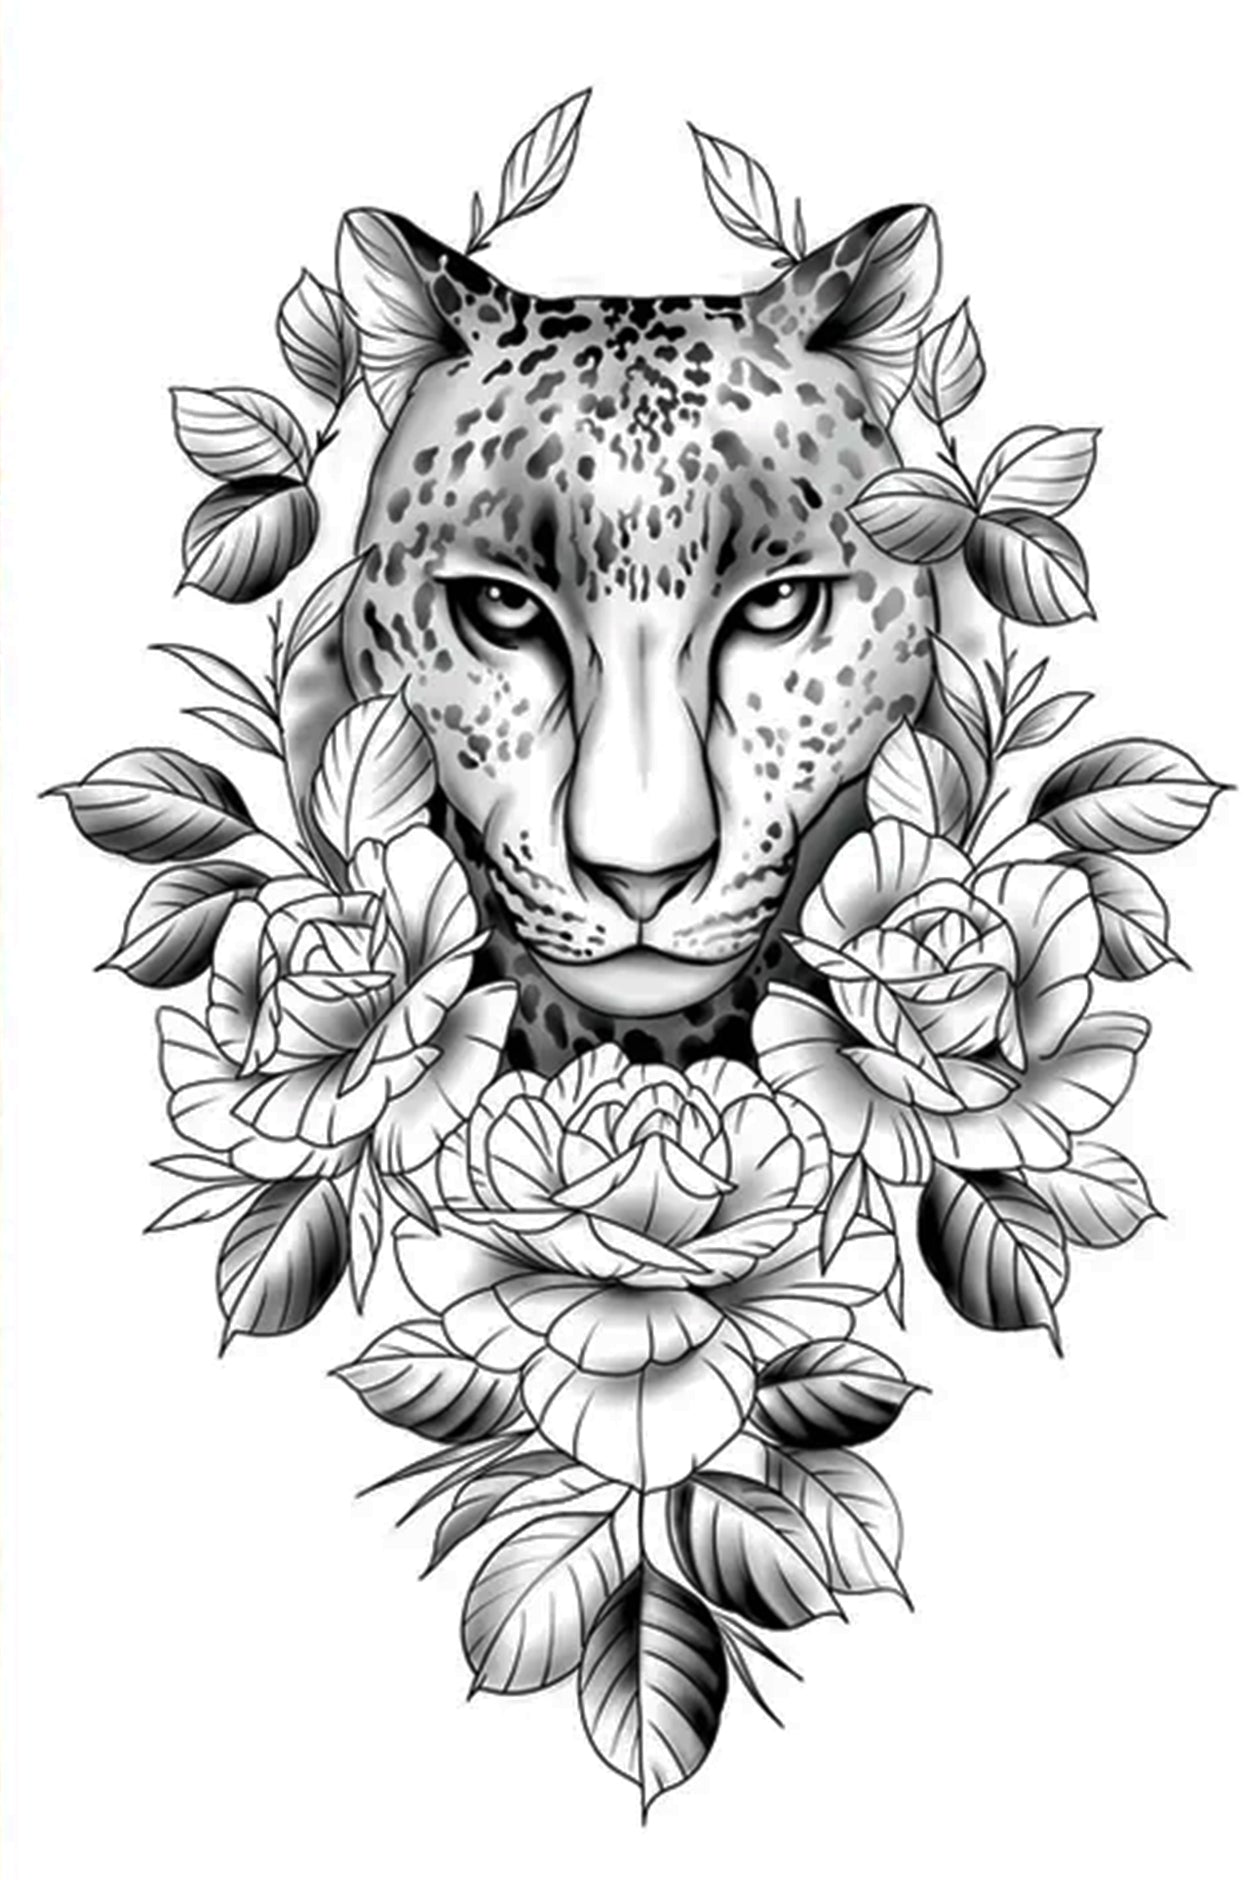 A slender and fierce cheetah is surrounded by a soft bouquet of beauty roses. The powerful cat is concentrating on his next prey while encircled in a symbol of timeless love.